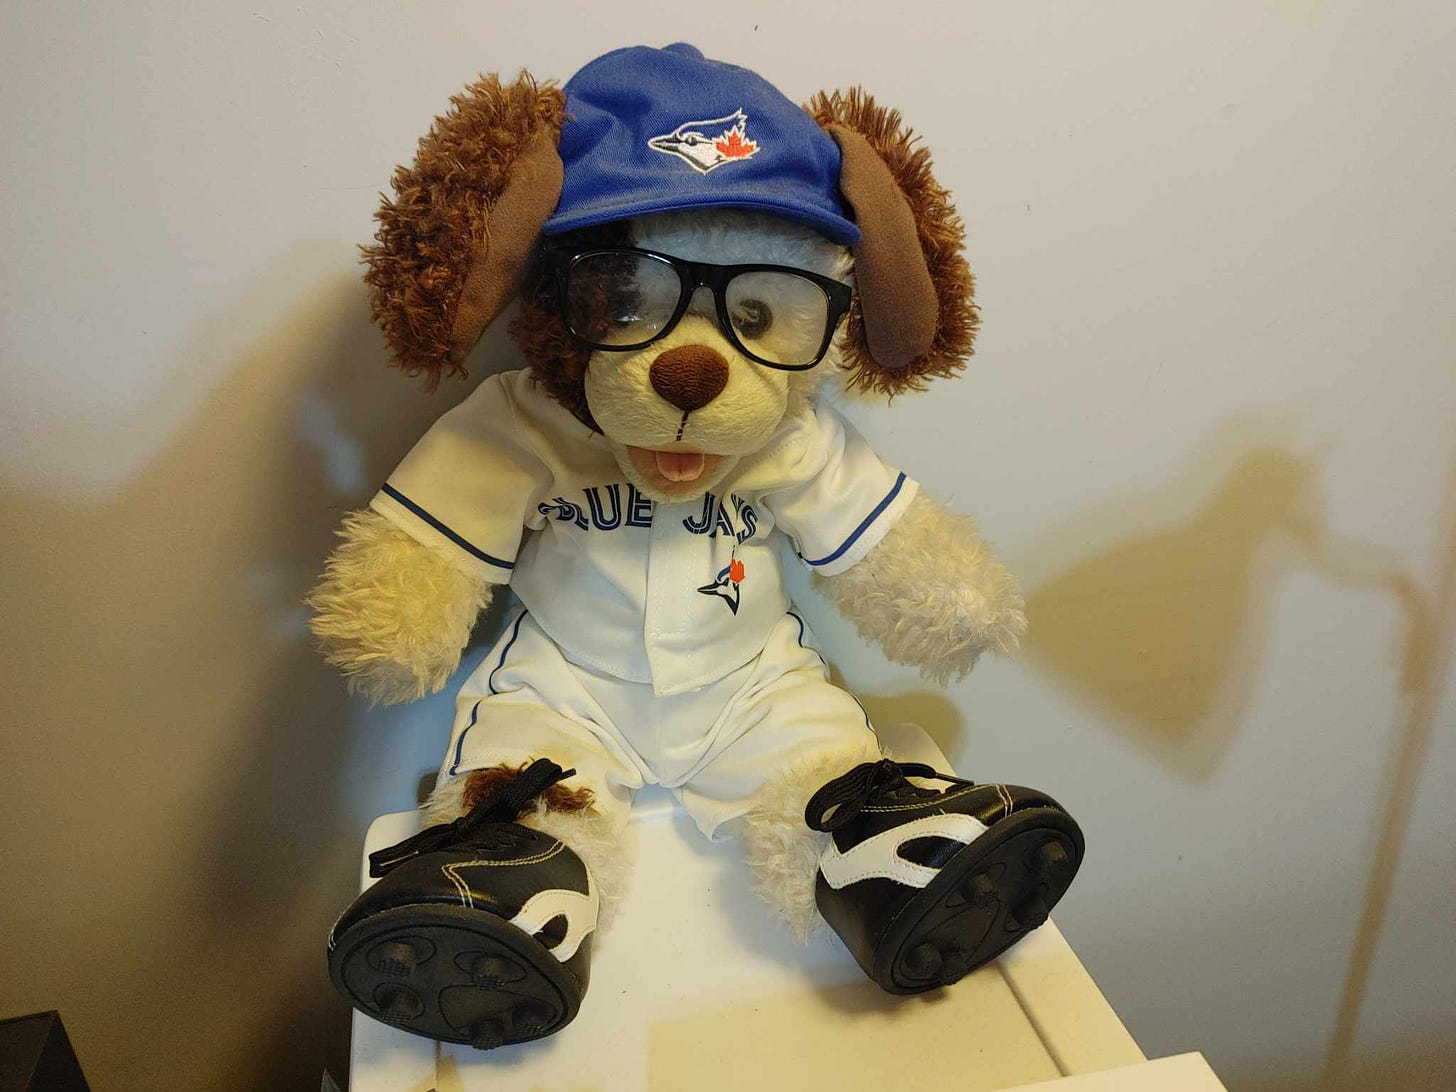 A build-a-bear dog wearing a Blue Jays had with its 2 brown floppy ears sticking out, along with a white Blue Jays jersey and pants over its white fluffy fur, and cleats on its feet.